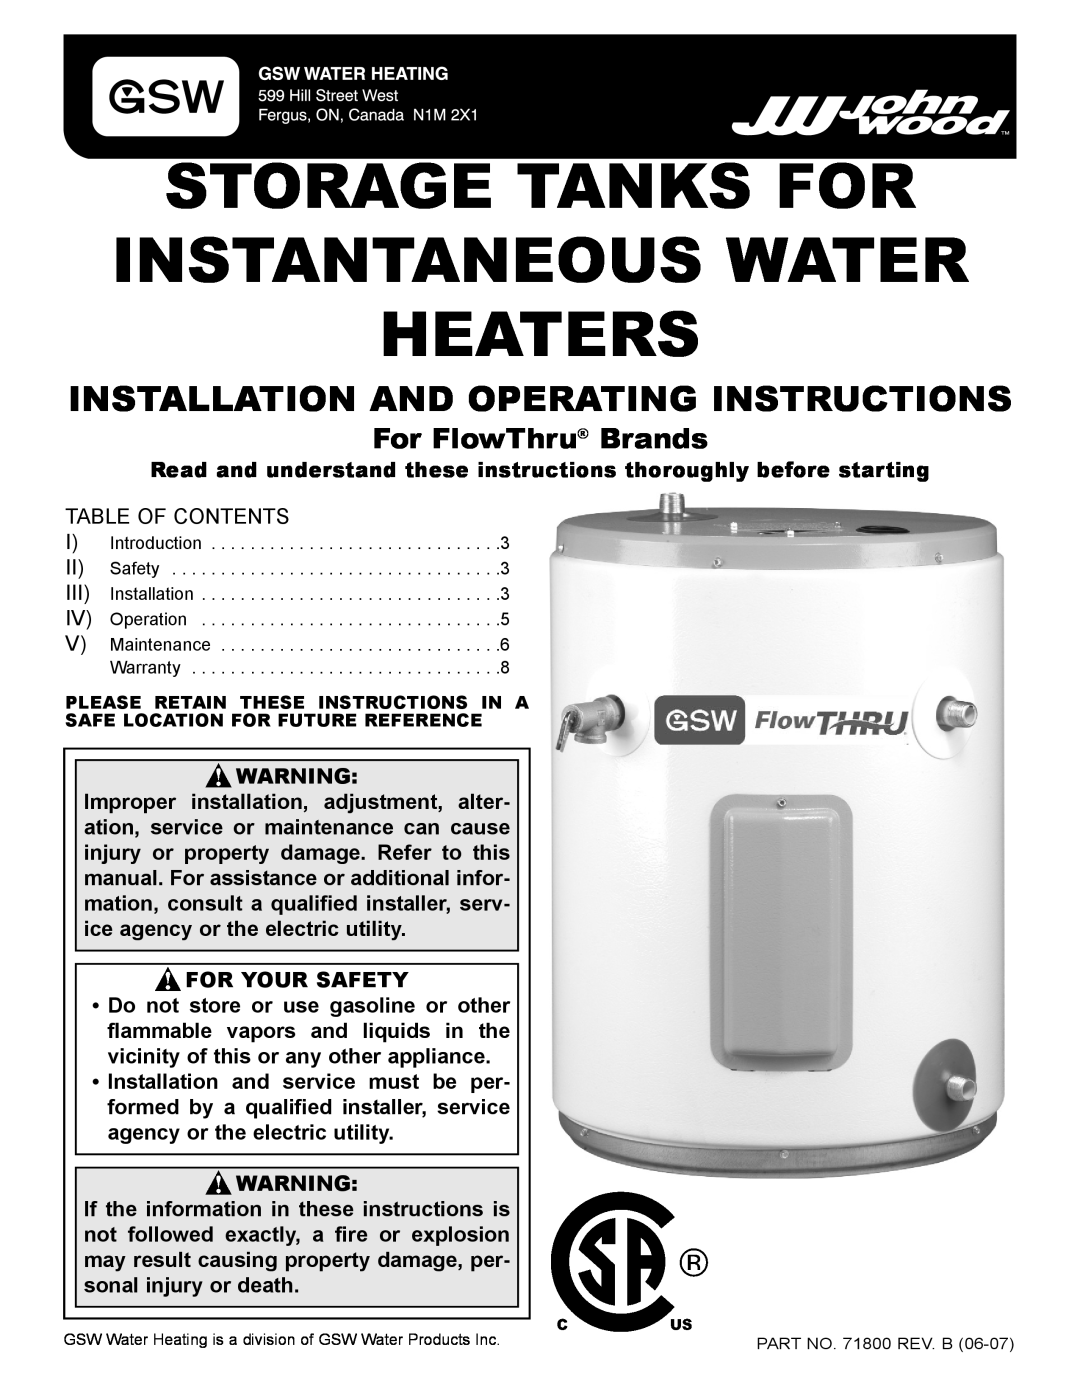 GSW warranty For Your Safety, Storage Tanks For Instantaneous Water Heaters, For FlowThru Brands 